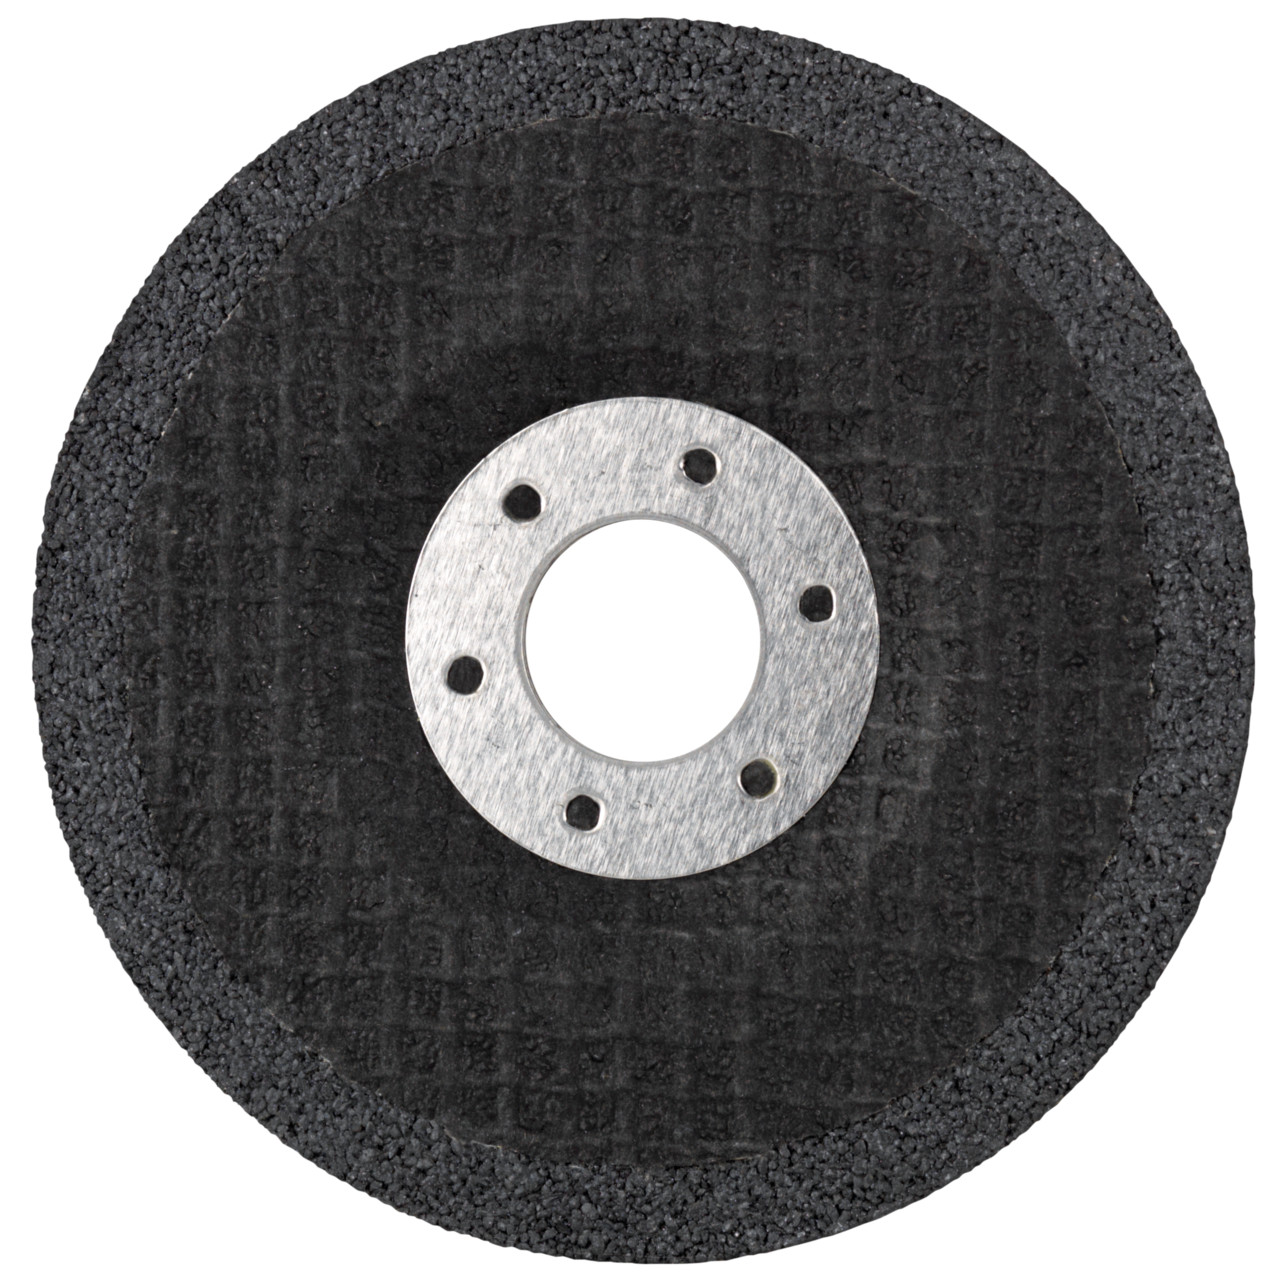 Tyrolit Cutting disc CUT AND GRIND DxUxH 178x3.5x22.23 2in1 for steel and stainless steel, shape: 27EC - offset version (CUT AND GRIND) , Art. 743947